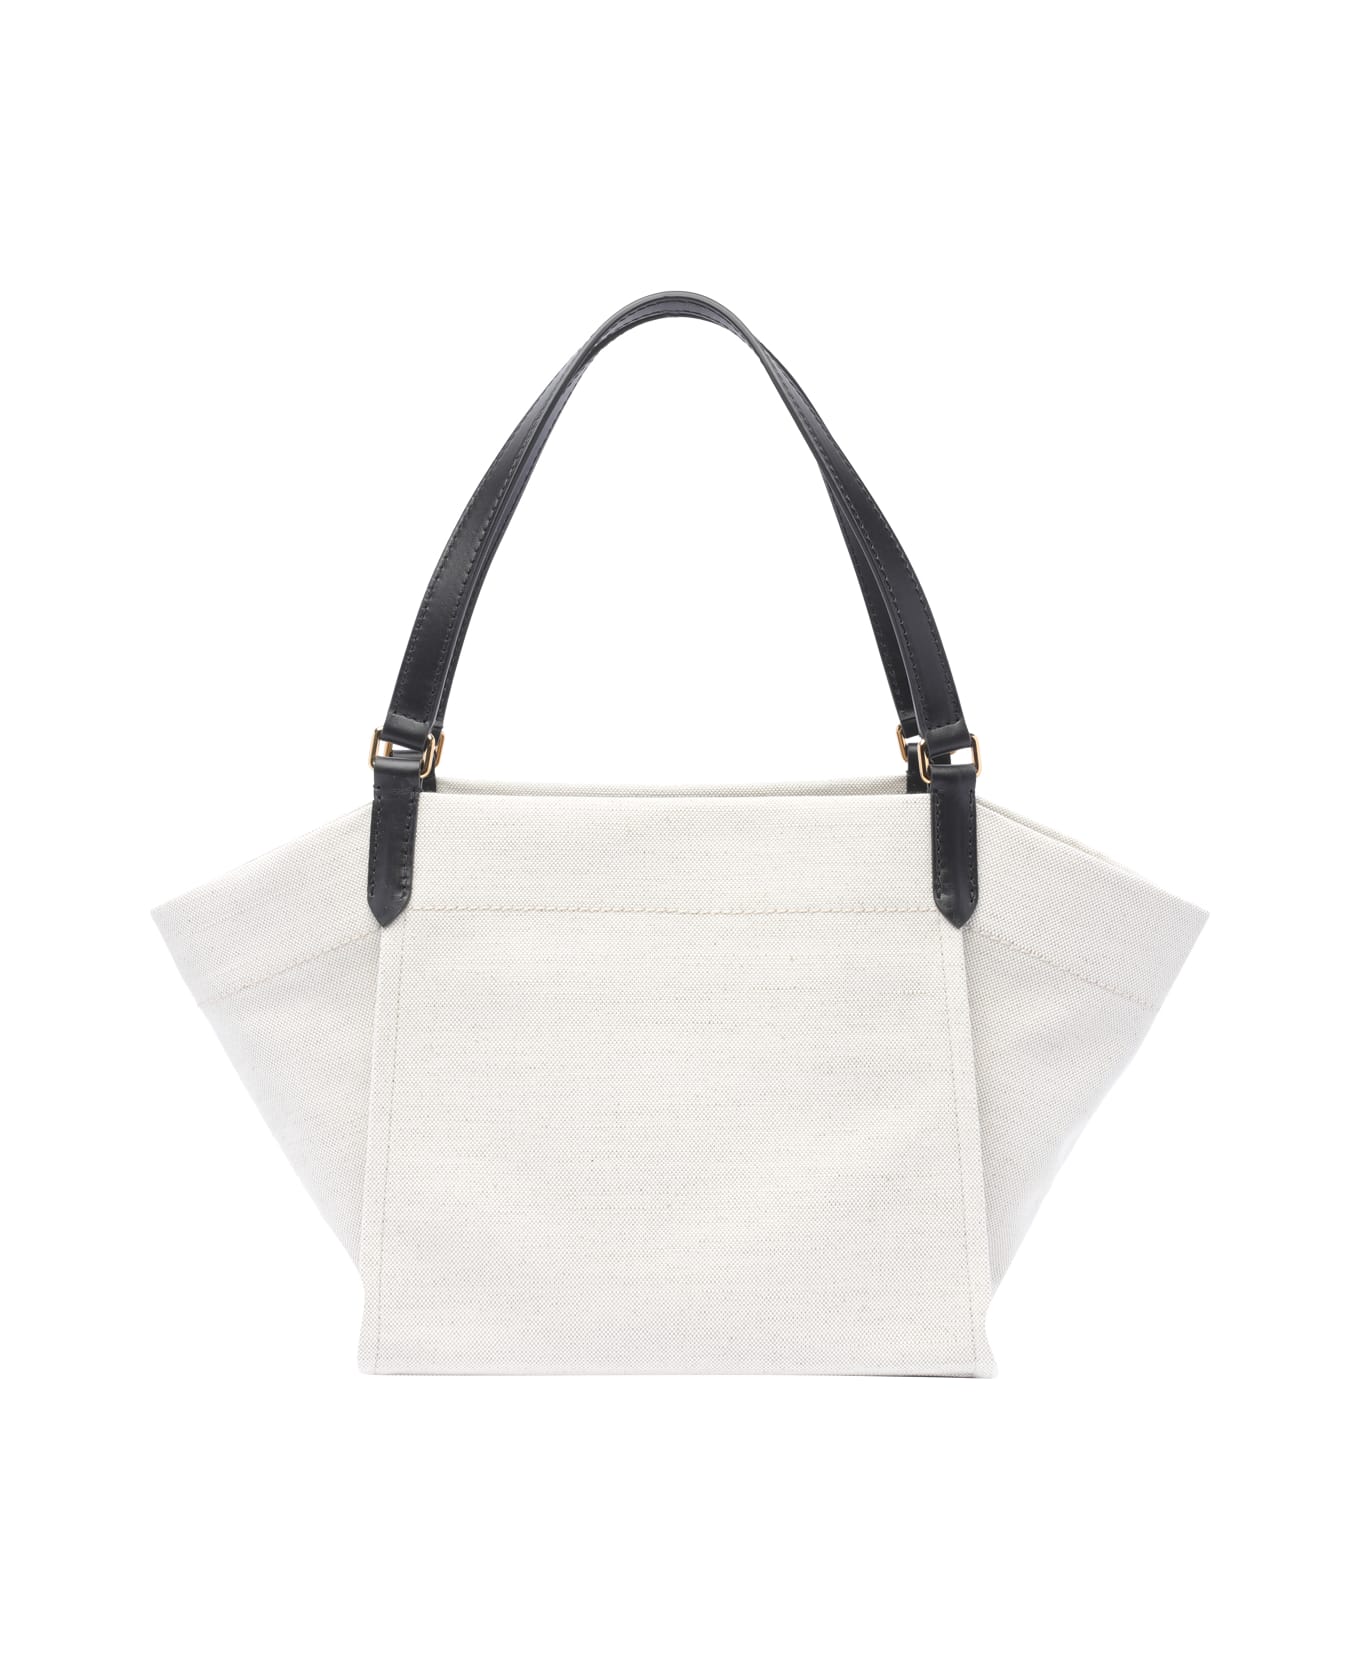 Tom Ford Tote Bag - WHITE トートバッグ